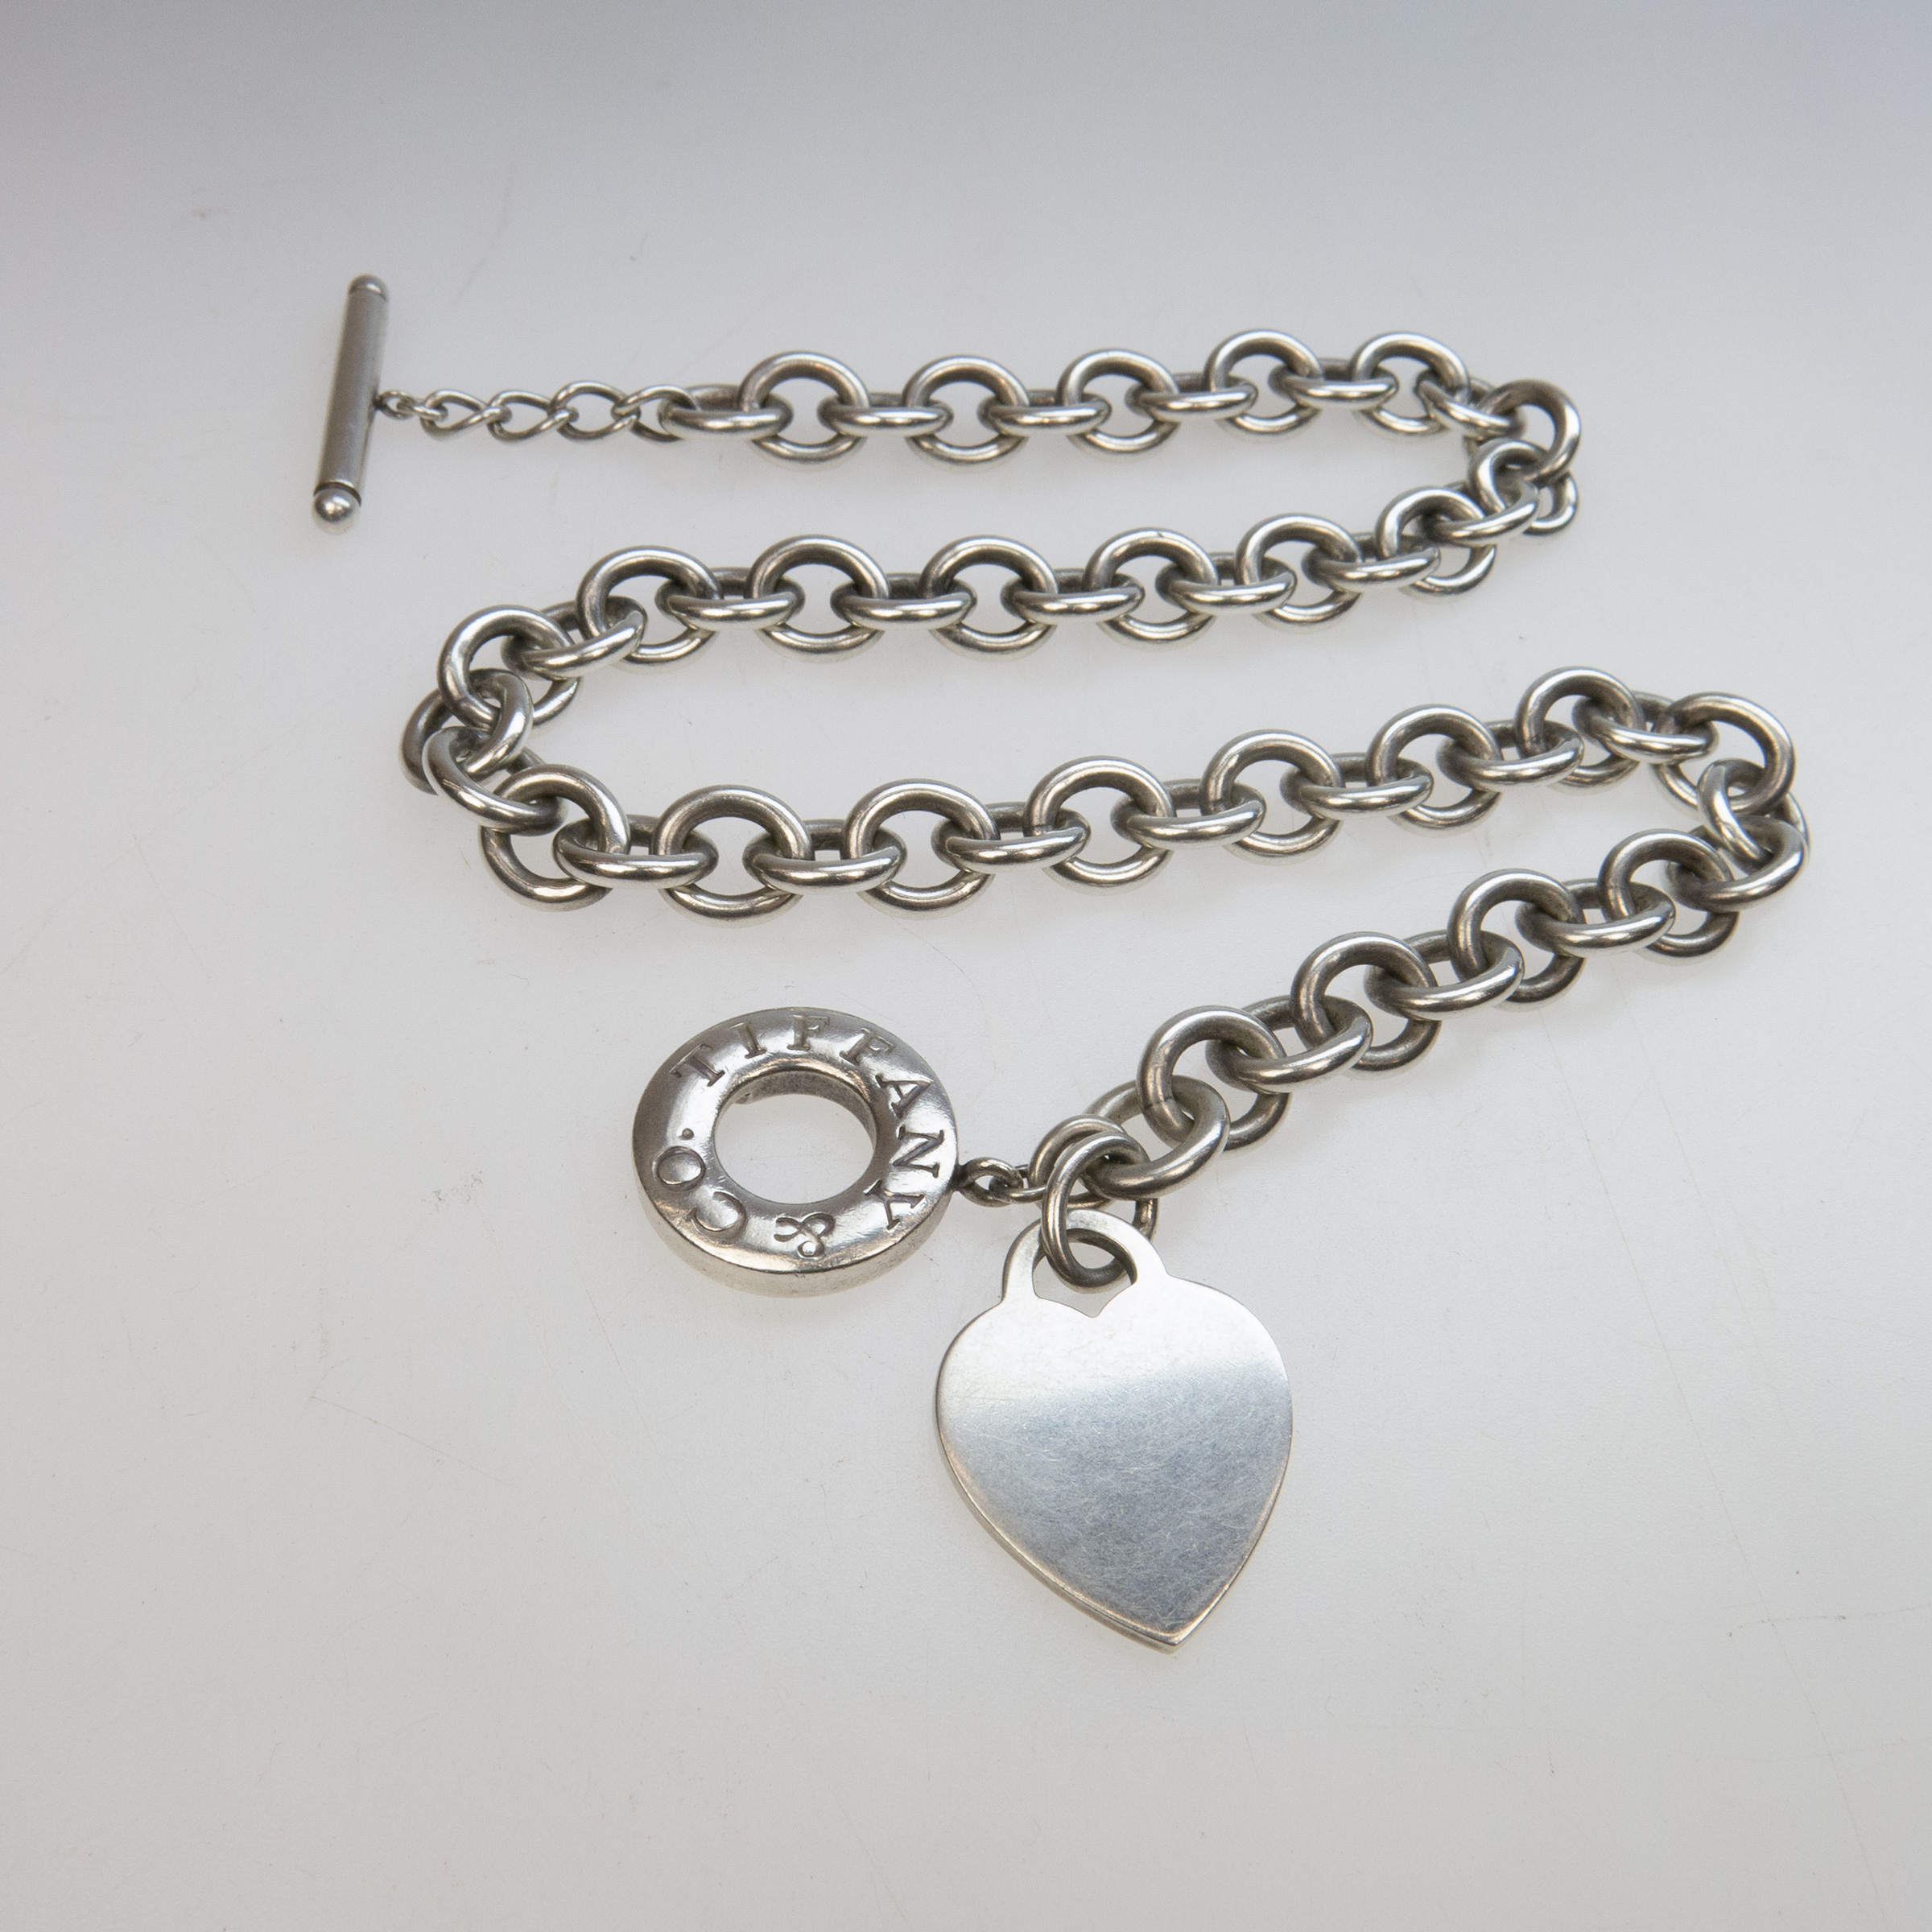 Tiffany & Co. Sterling Silver Circular Link Chain With Heart-Shaped Tag